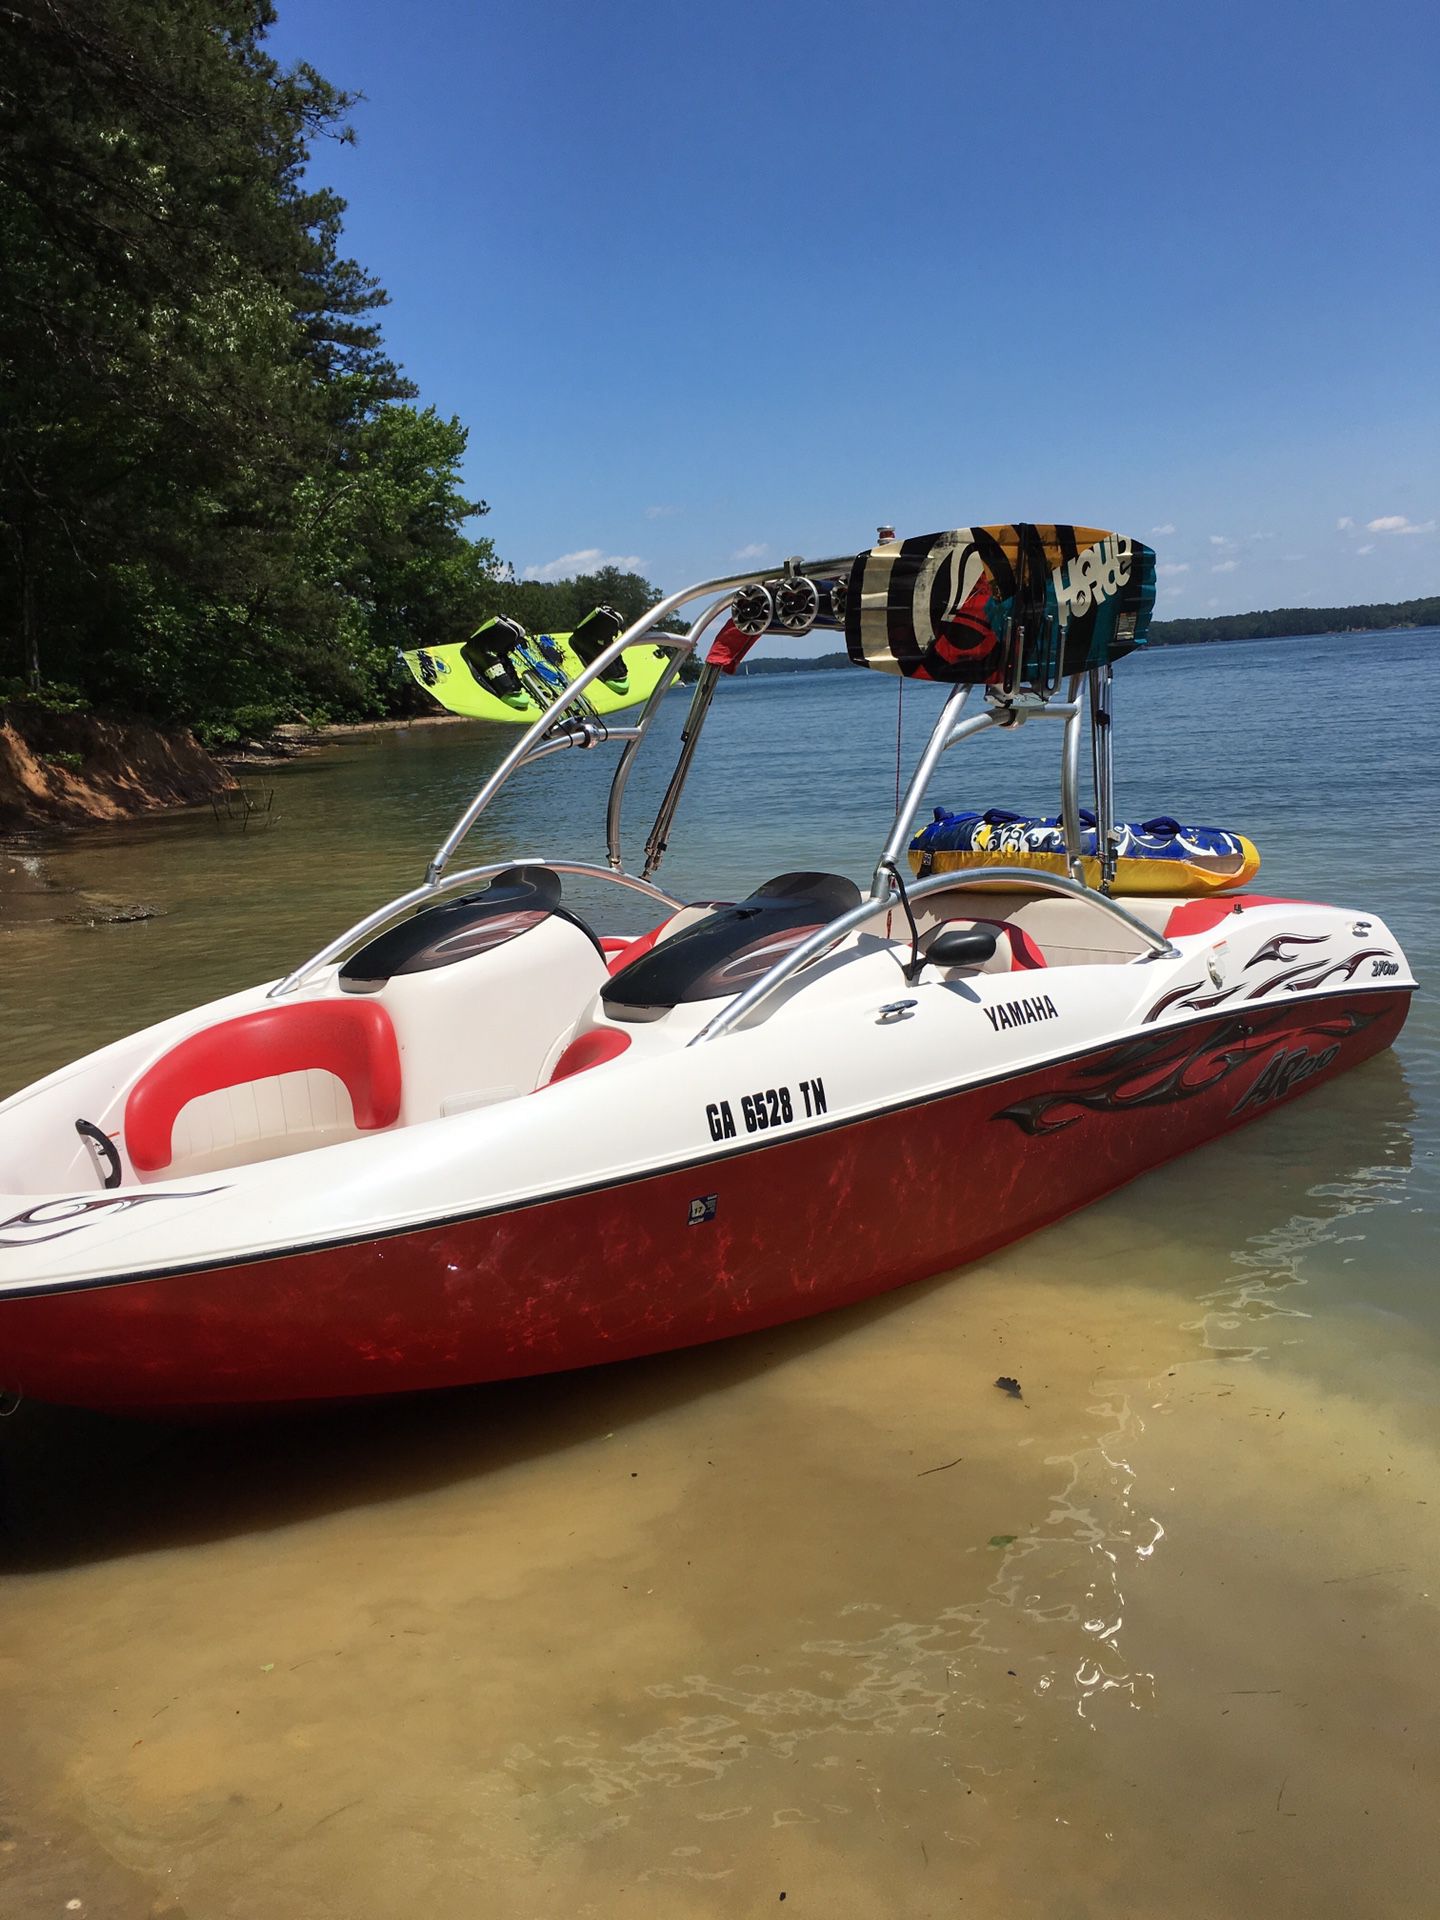 2005 YAMAHA BOAT 21” CLEAN TITLE IN HAND